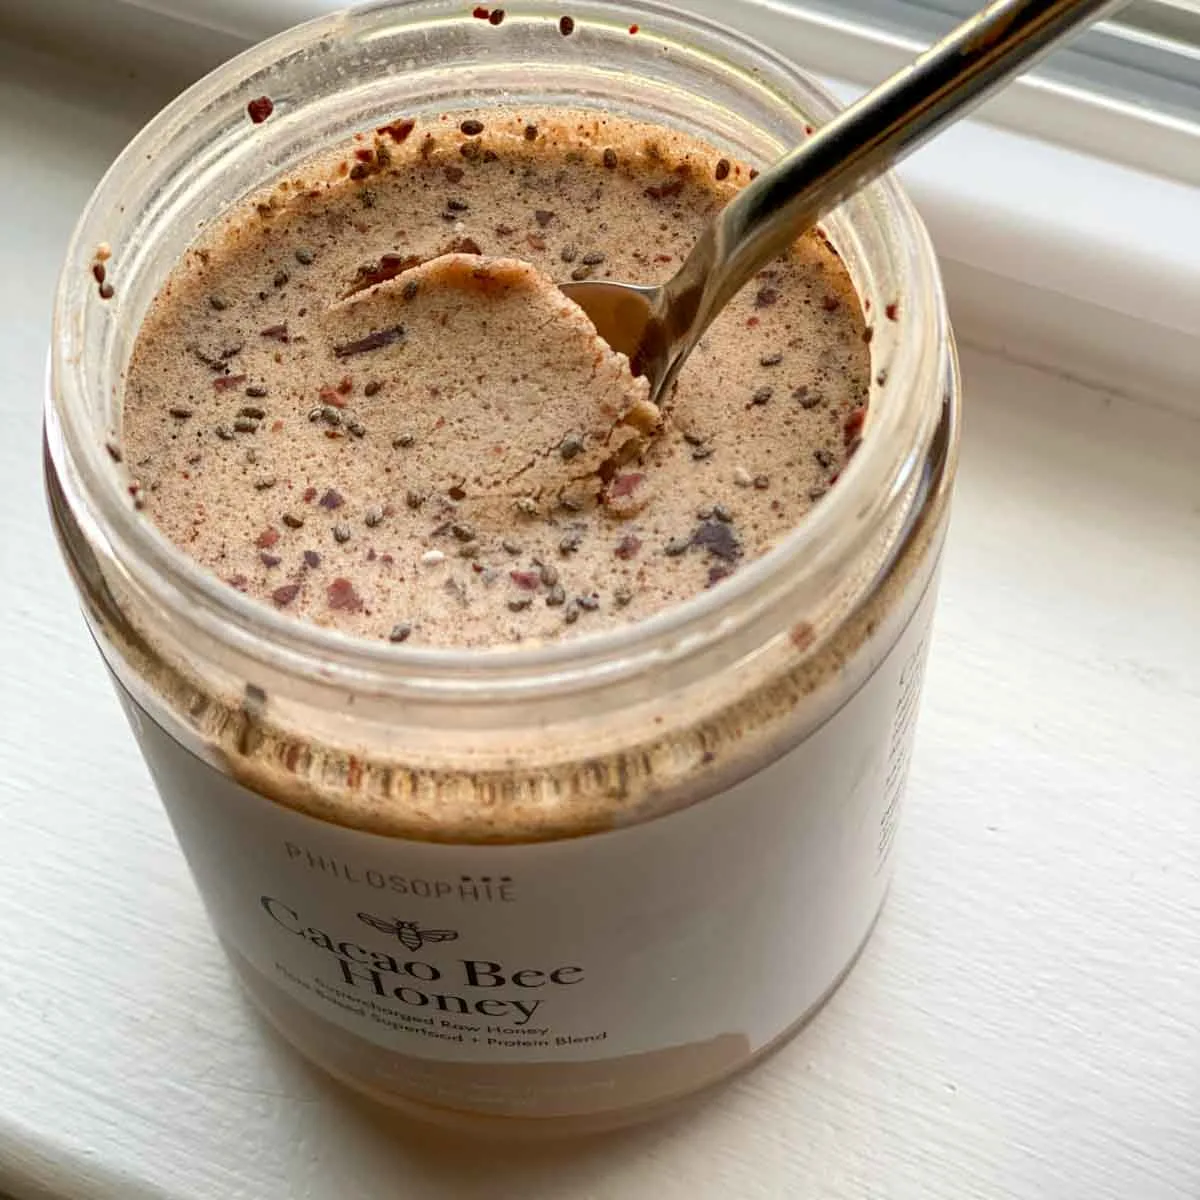 Philosophie's cacao bee honey with a spoon inside